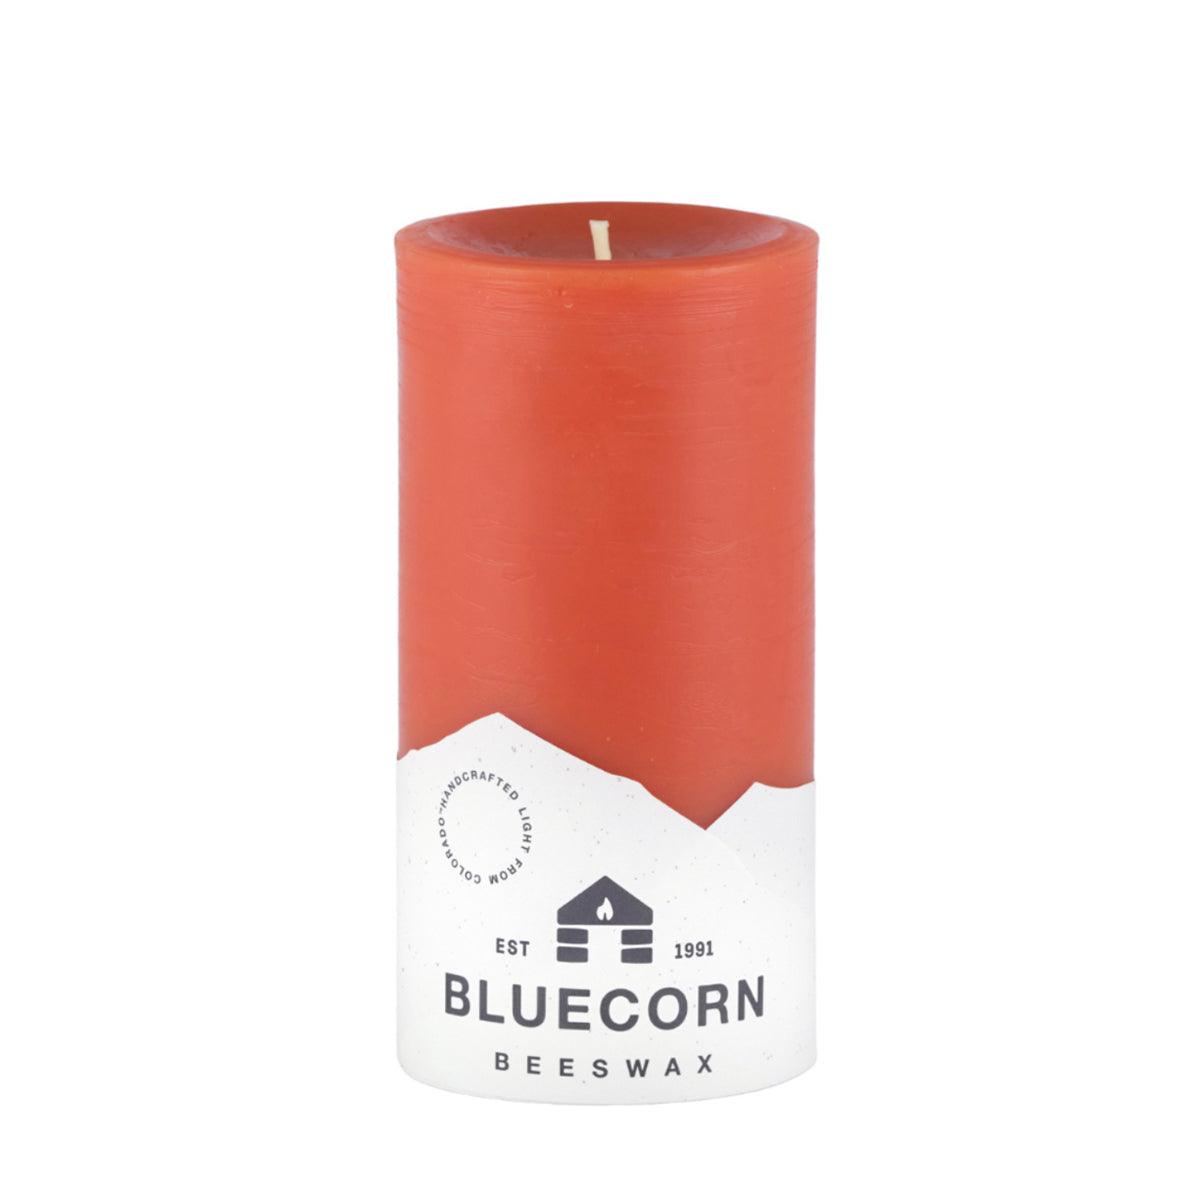 Bluecorn Beeswax 100% Pure Beeswax 3" x 6" Colored Pillar Candle is Apricot in color. Burn Time: 90 hours. Made with 100% Pure Beeswax, is . Made with 100% pure cotton wick, no lead and paraffin free. Clean burning and non-toxic. Features Bluecorn Beeswax label printed on 100% recycled paper.